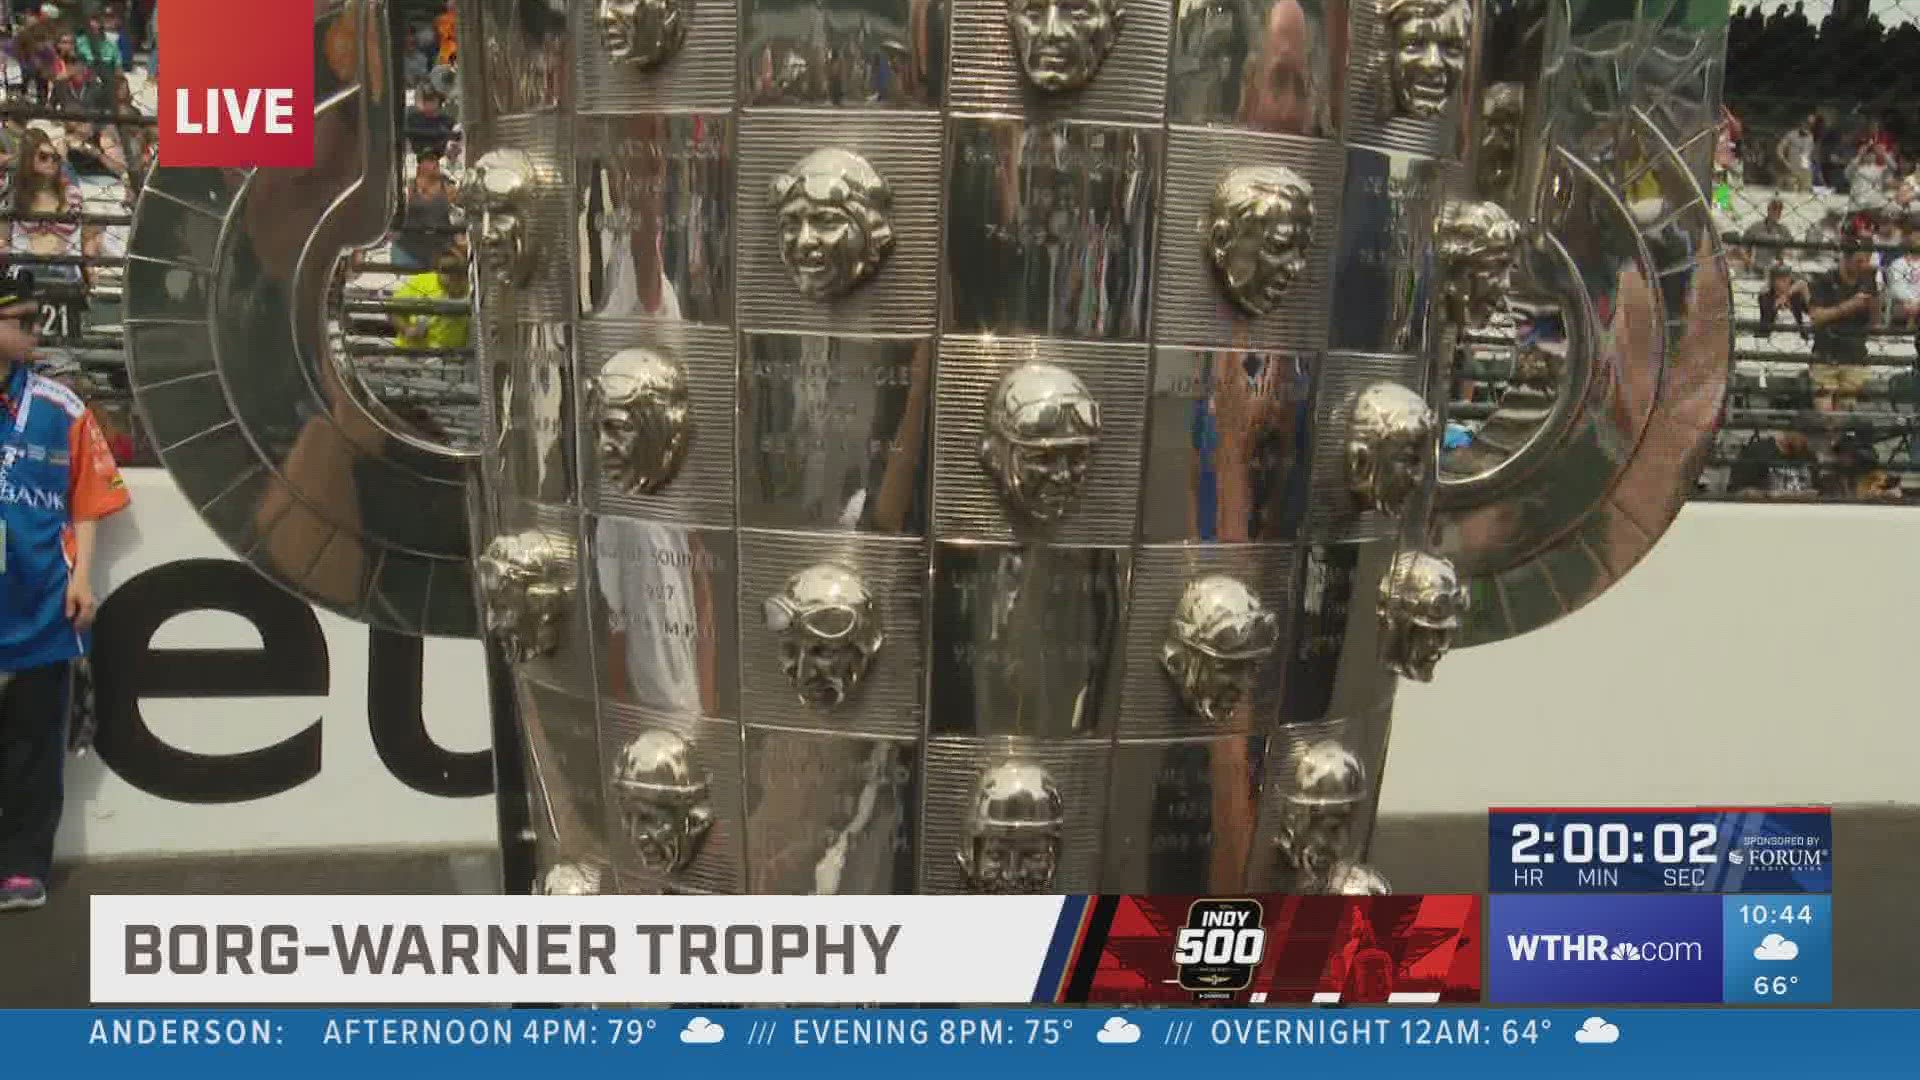 Chuck Lofton gives us an up close look at the trophy